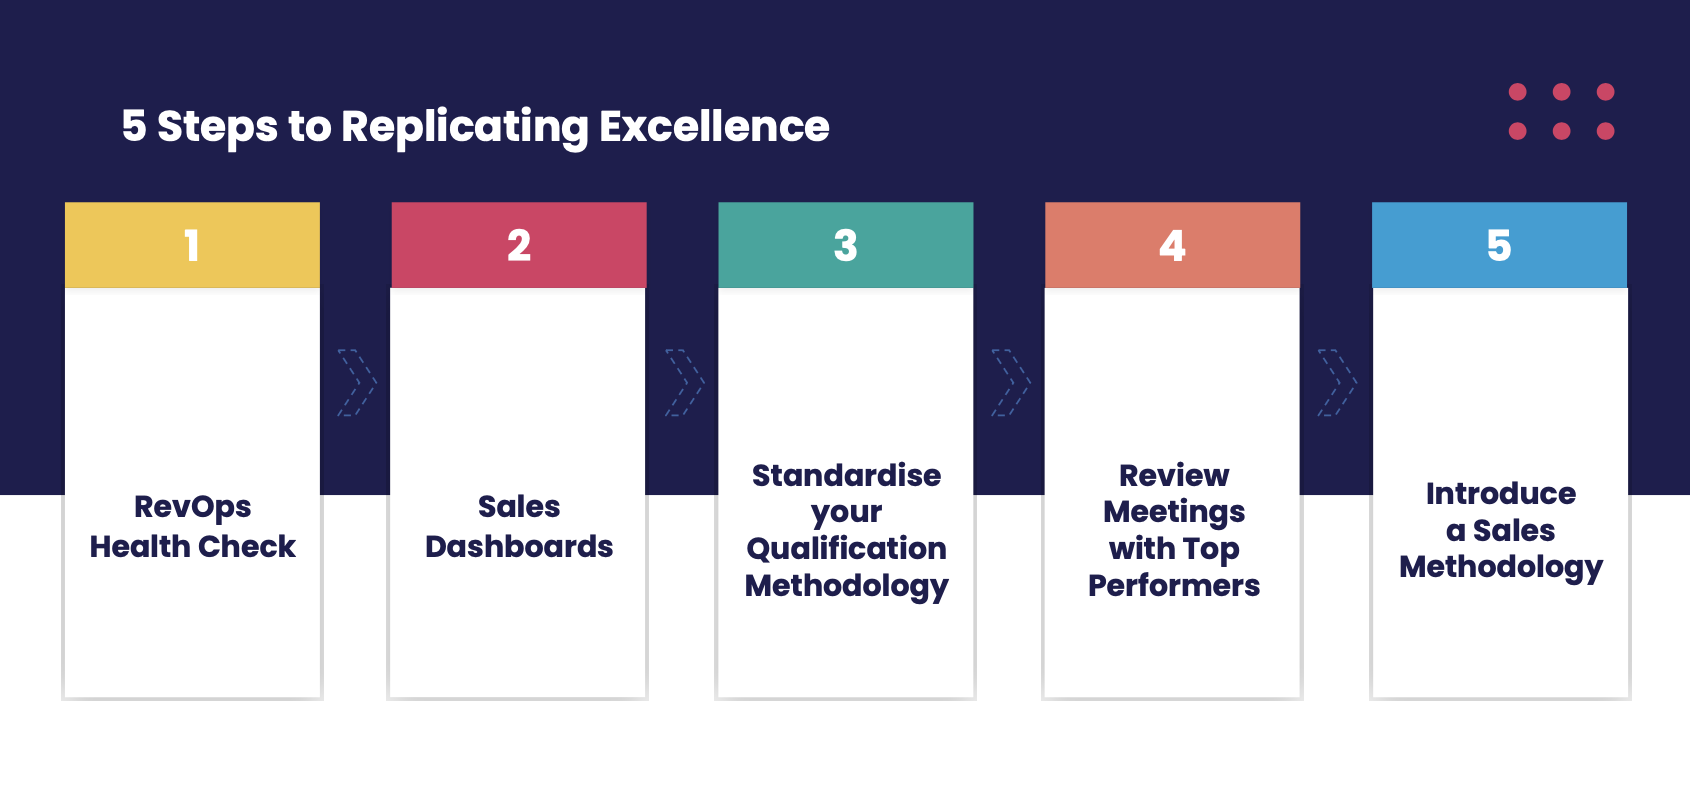 5 Steps to Sales Excellence